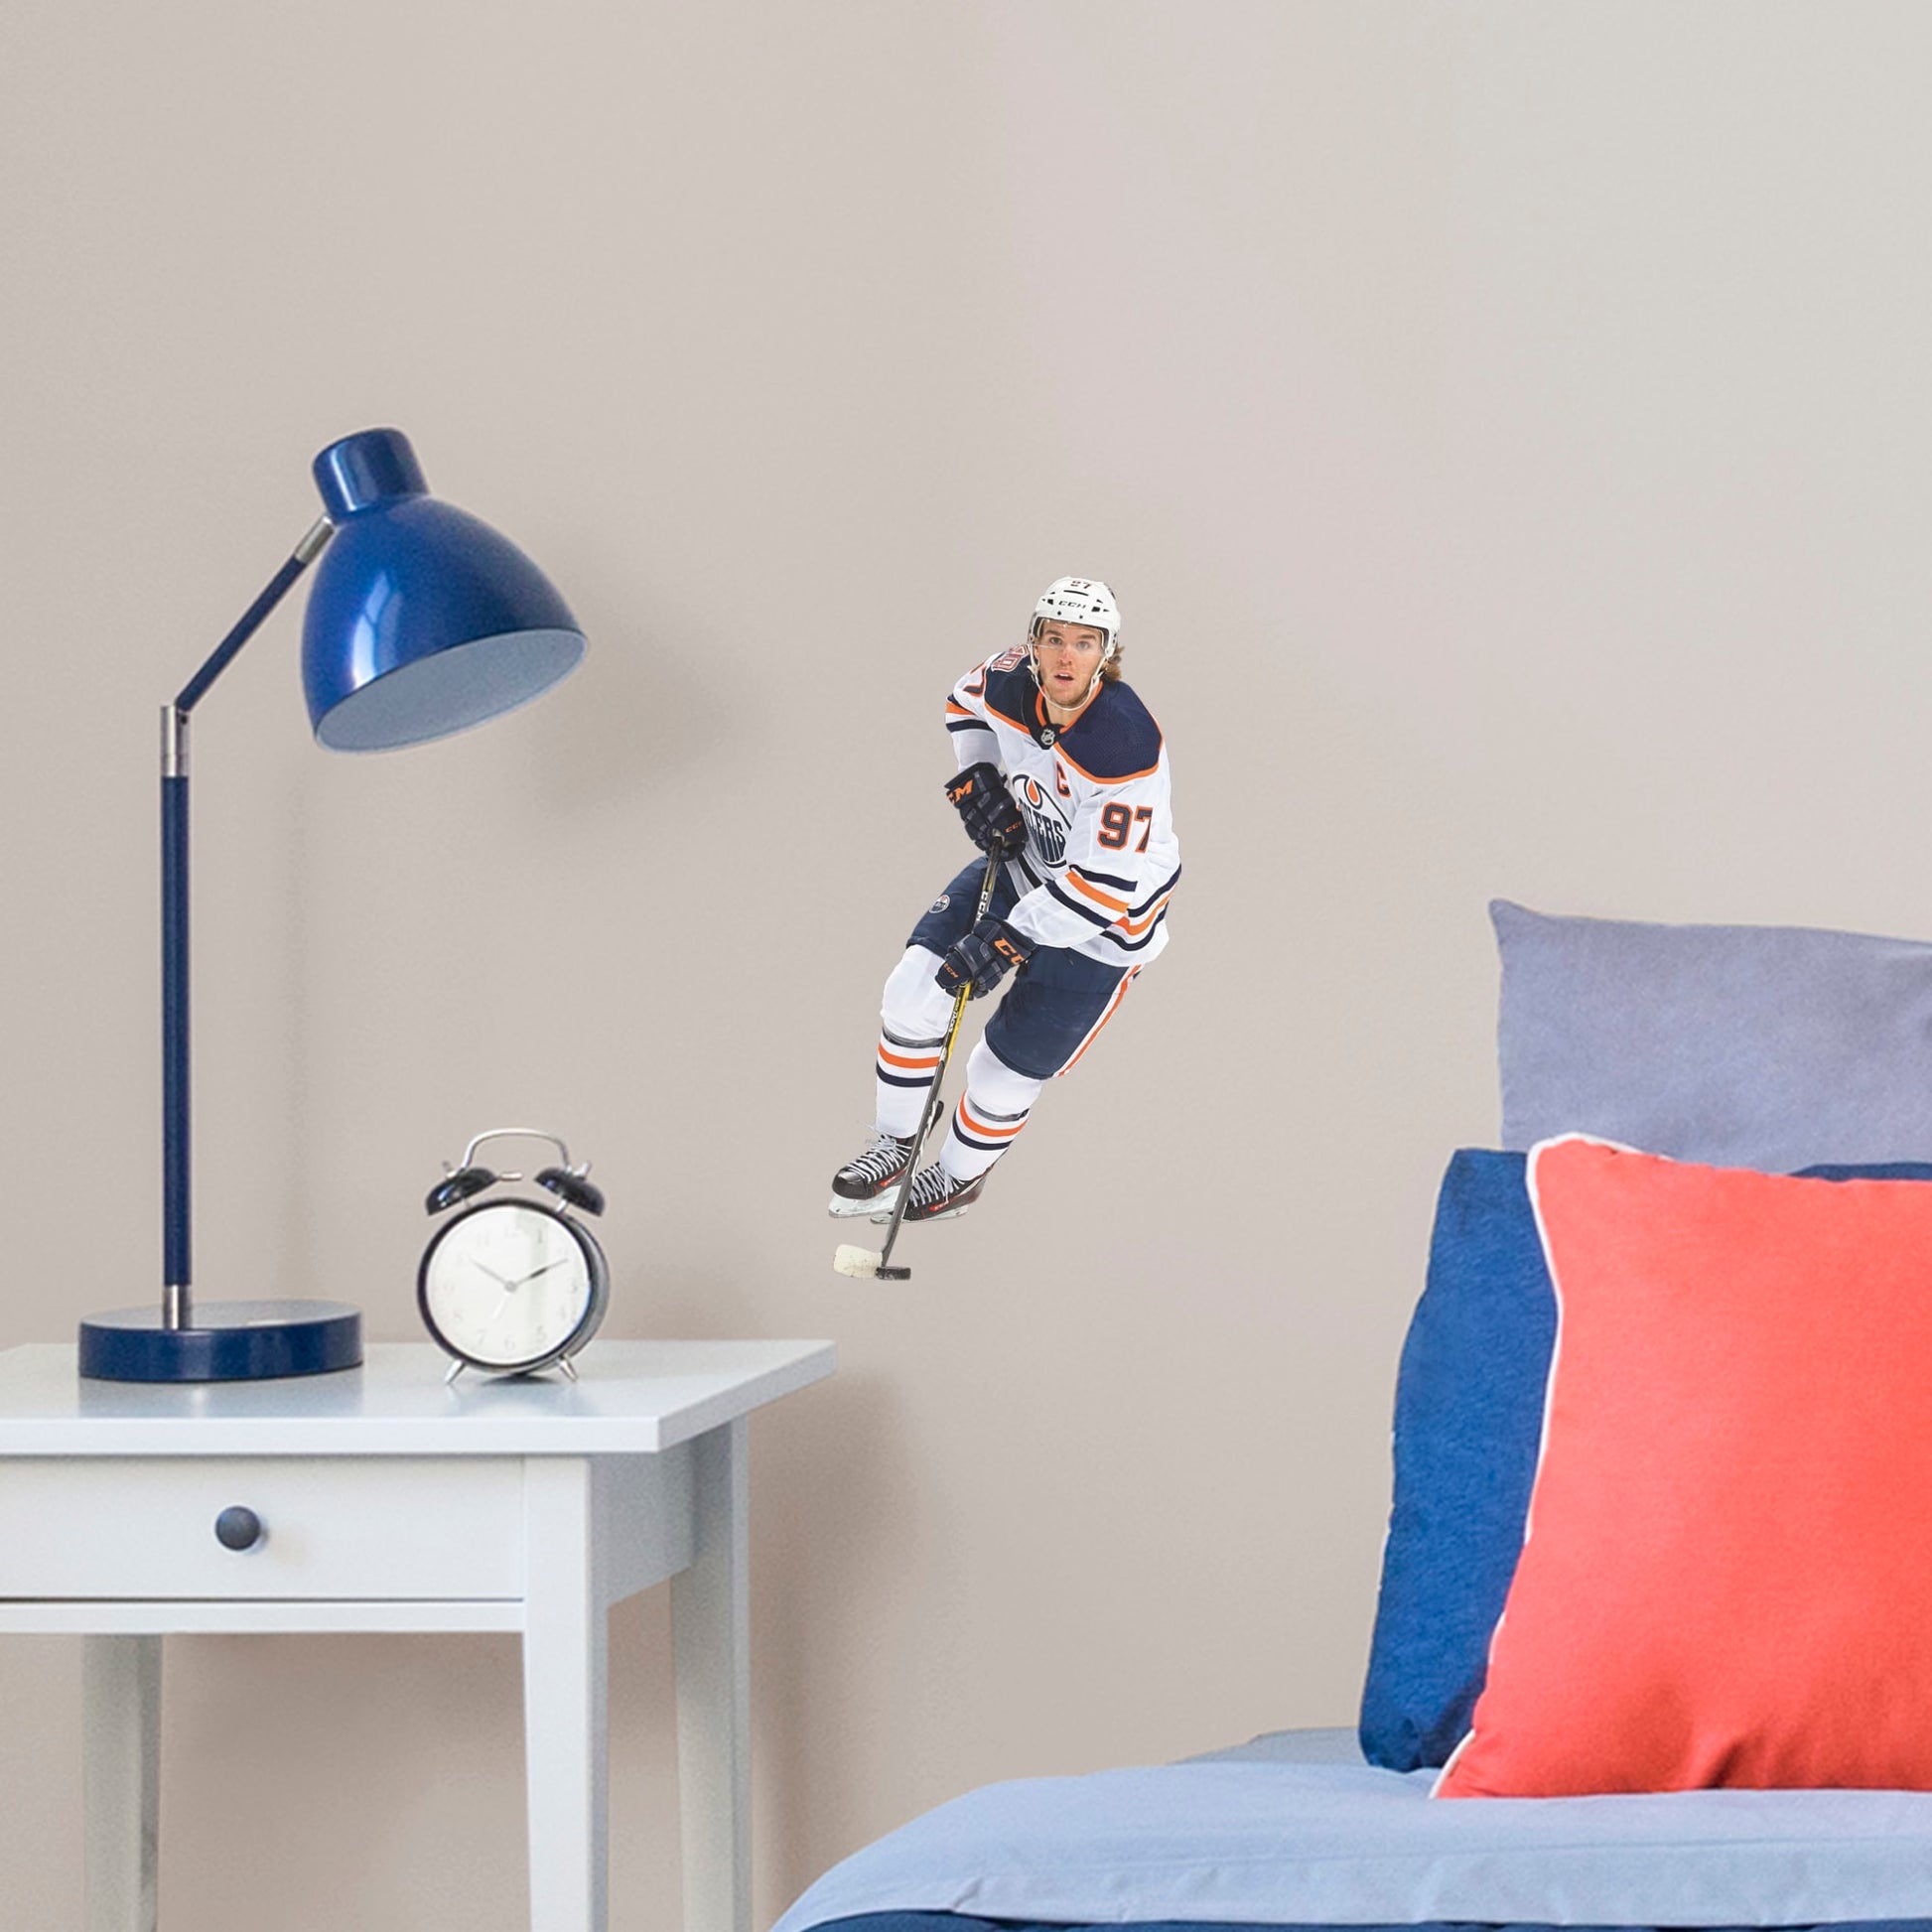 Large Athlete + 2 Team Decals (8"W x 17"H) Widely considered to be among the best NHL players in the world, Edmonton Oilers centre and team captain Connor McDavid has cemented himself as a high-caliber player for the Oilers. Affectionately referred to as “Connor McSaviour” and the “Canadian Super Promise,” this officially licensed NHL wall decal depicts the full frame of the Edmonton Oiler’s 2015 first overall draft pick in his Away uniform.